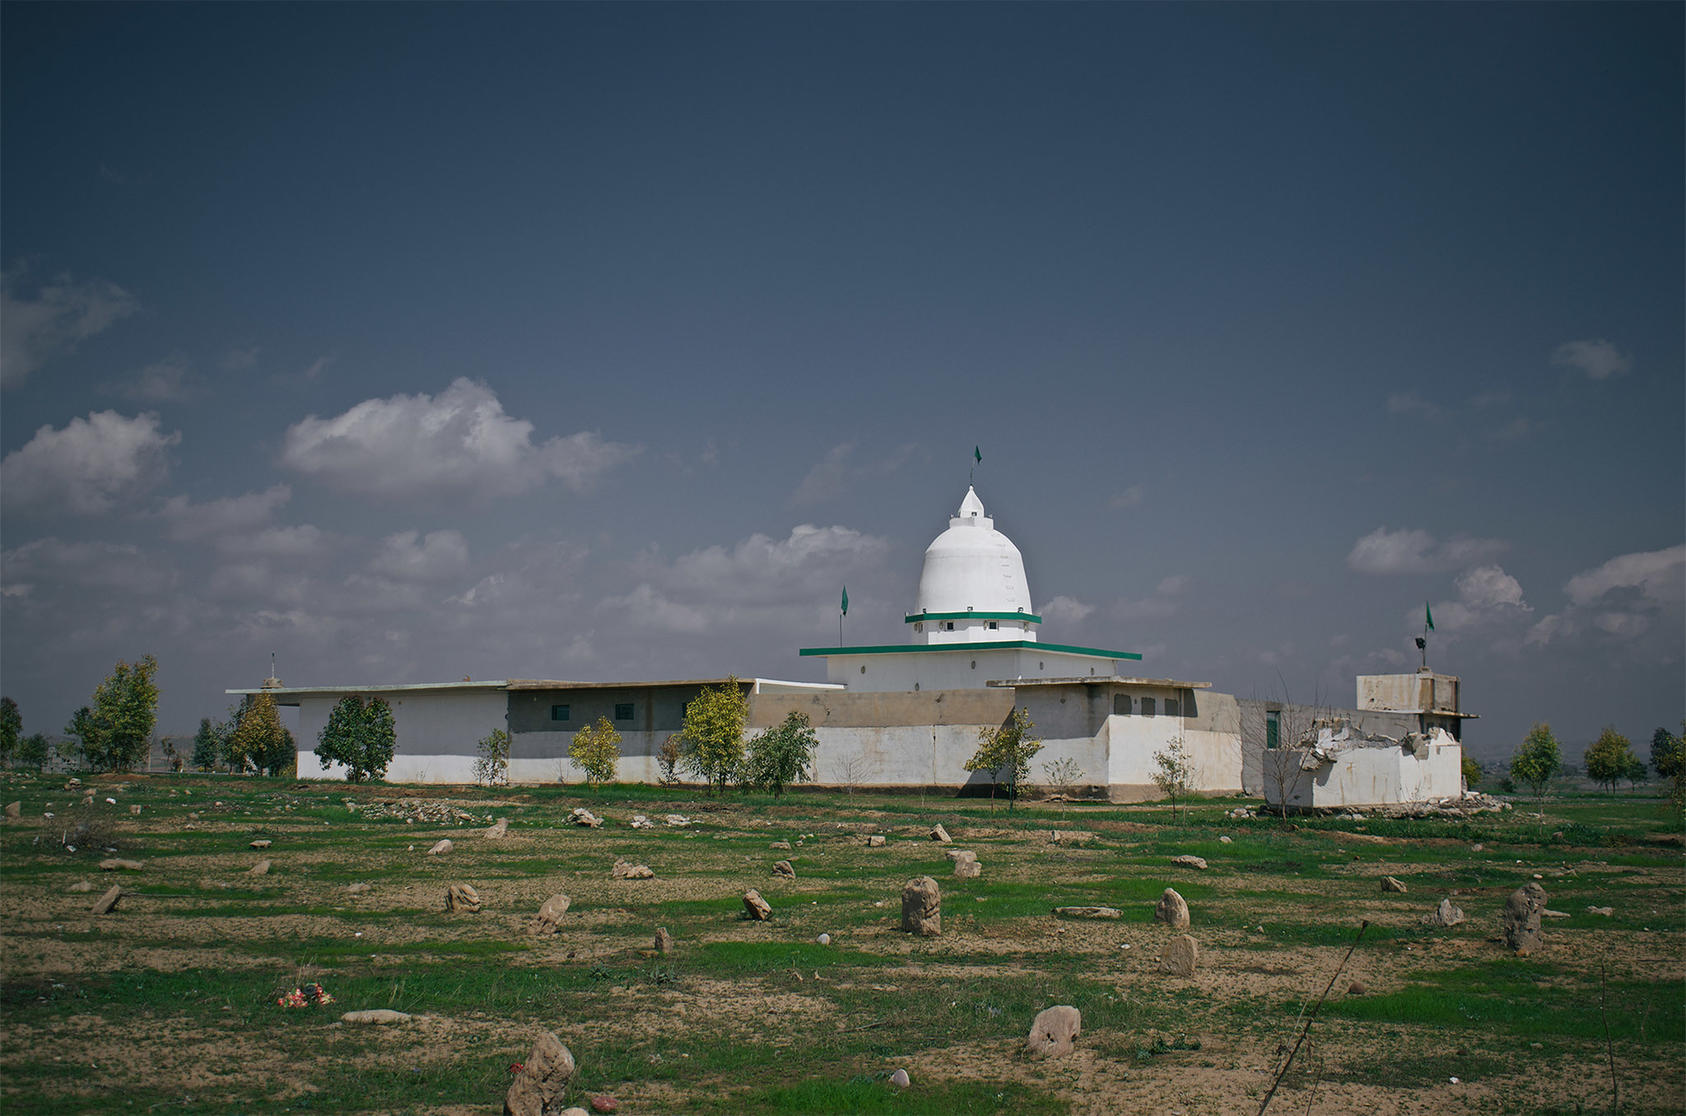 This Kakai religious shrine, called Shah Hayas, in the Iraqi village of Wardik was destroyed by ISIS in 2014 and rebuilt in 2017. (Levi Clancy/Wikimedia Commons)